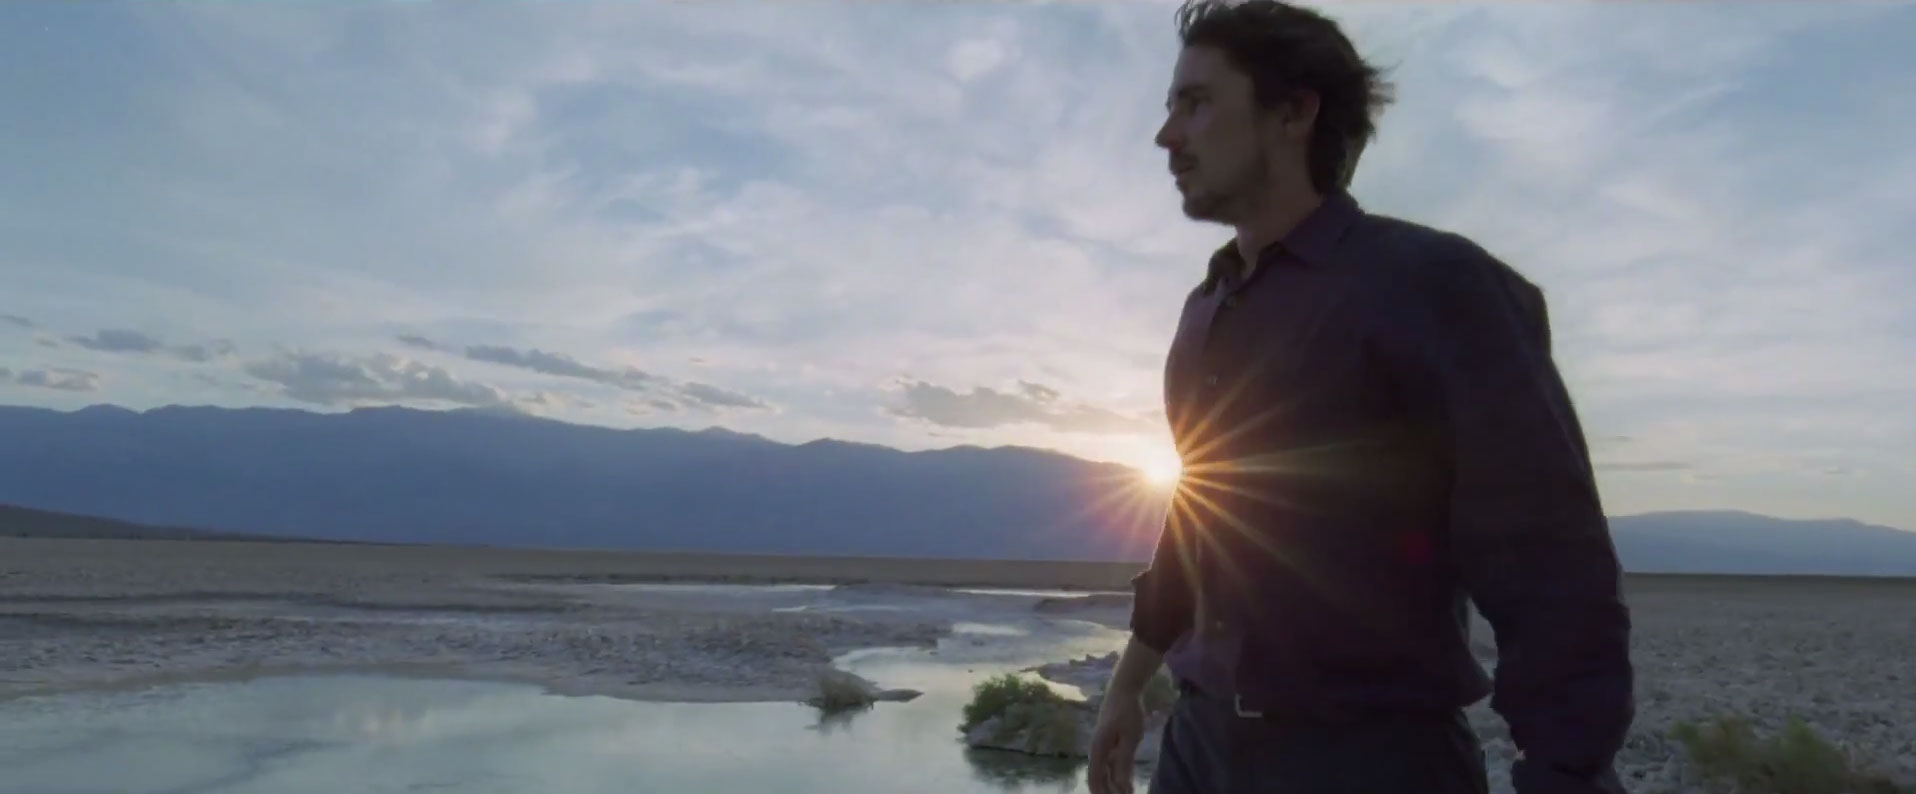 knight of cups chivo